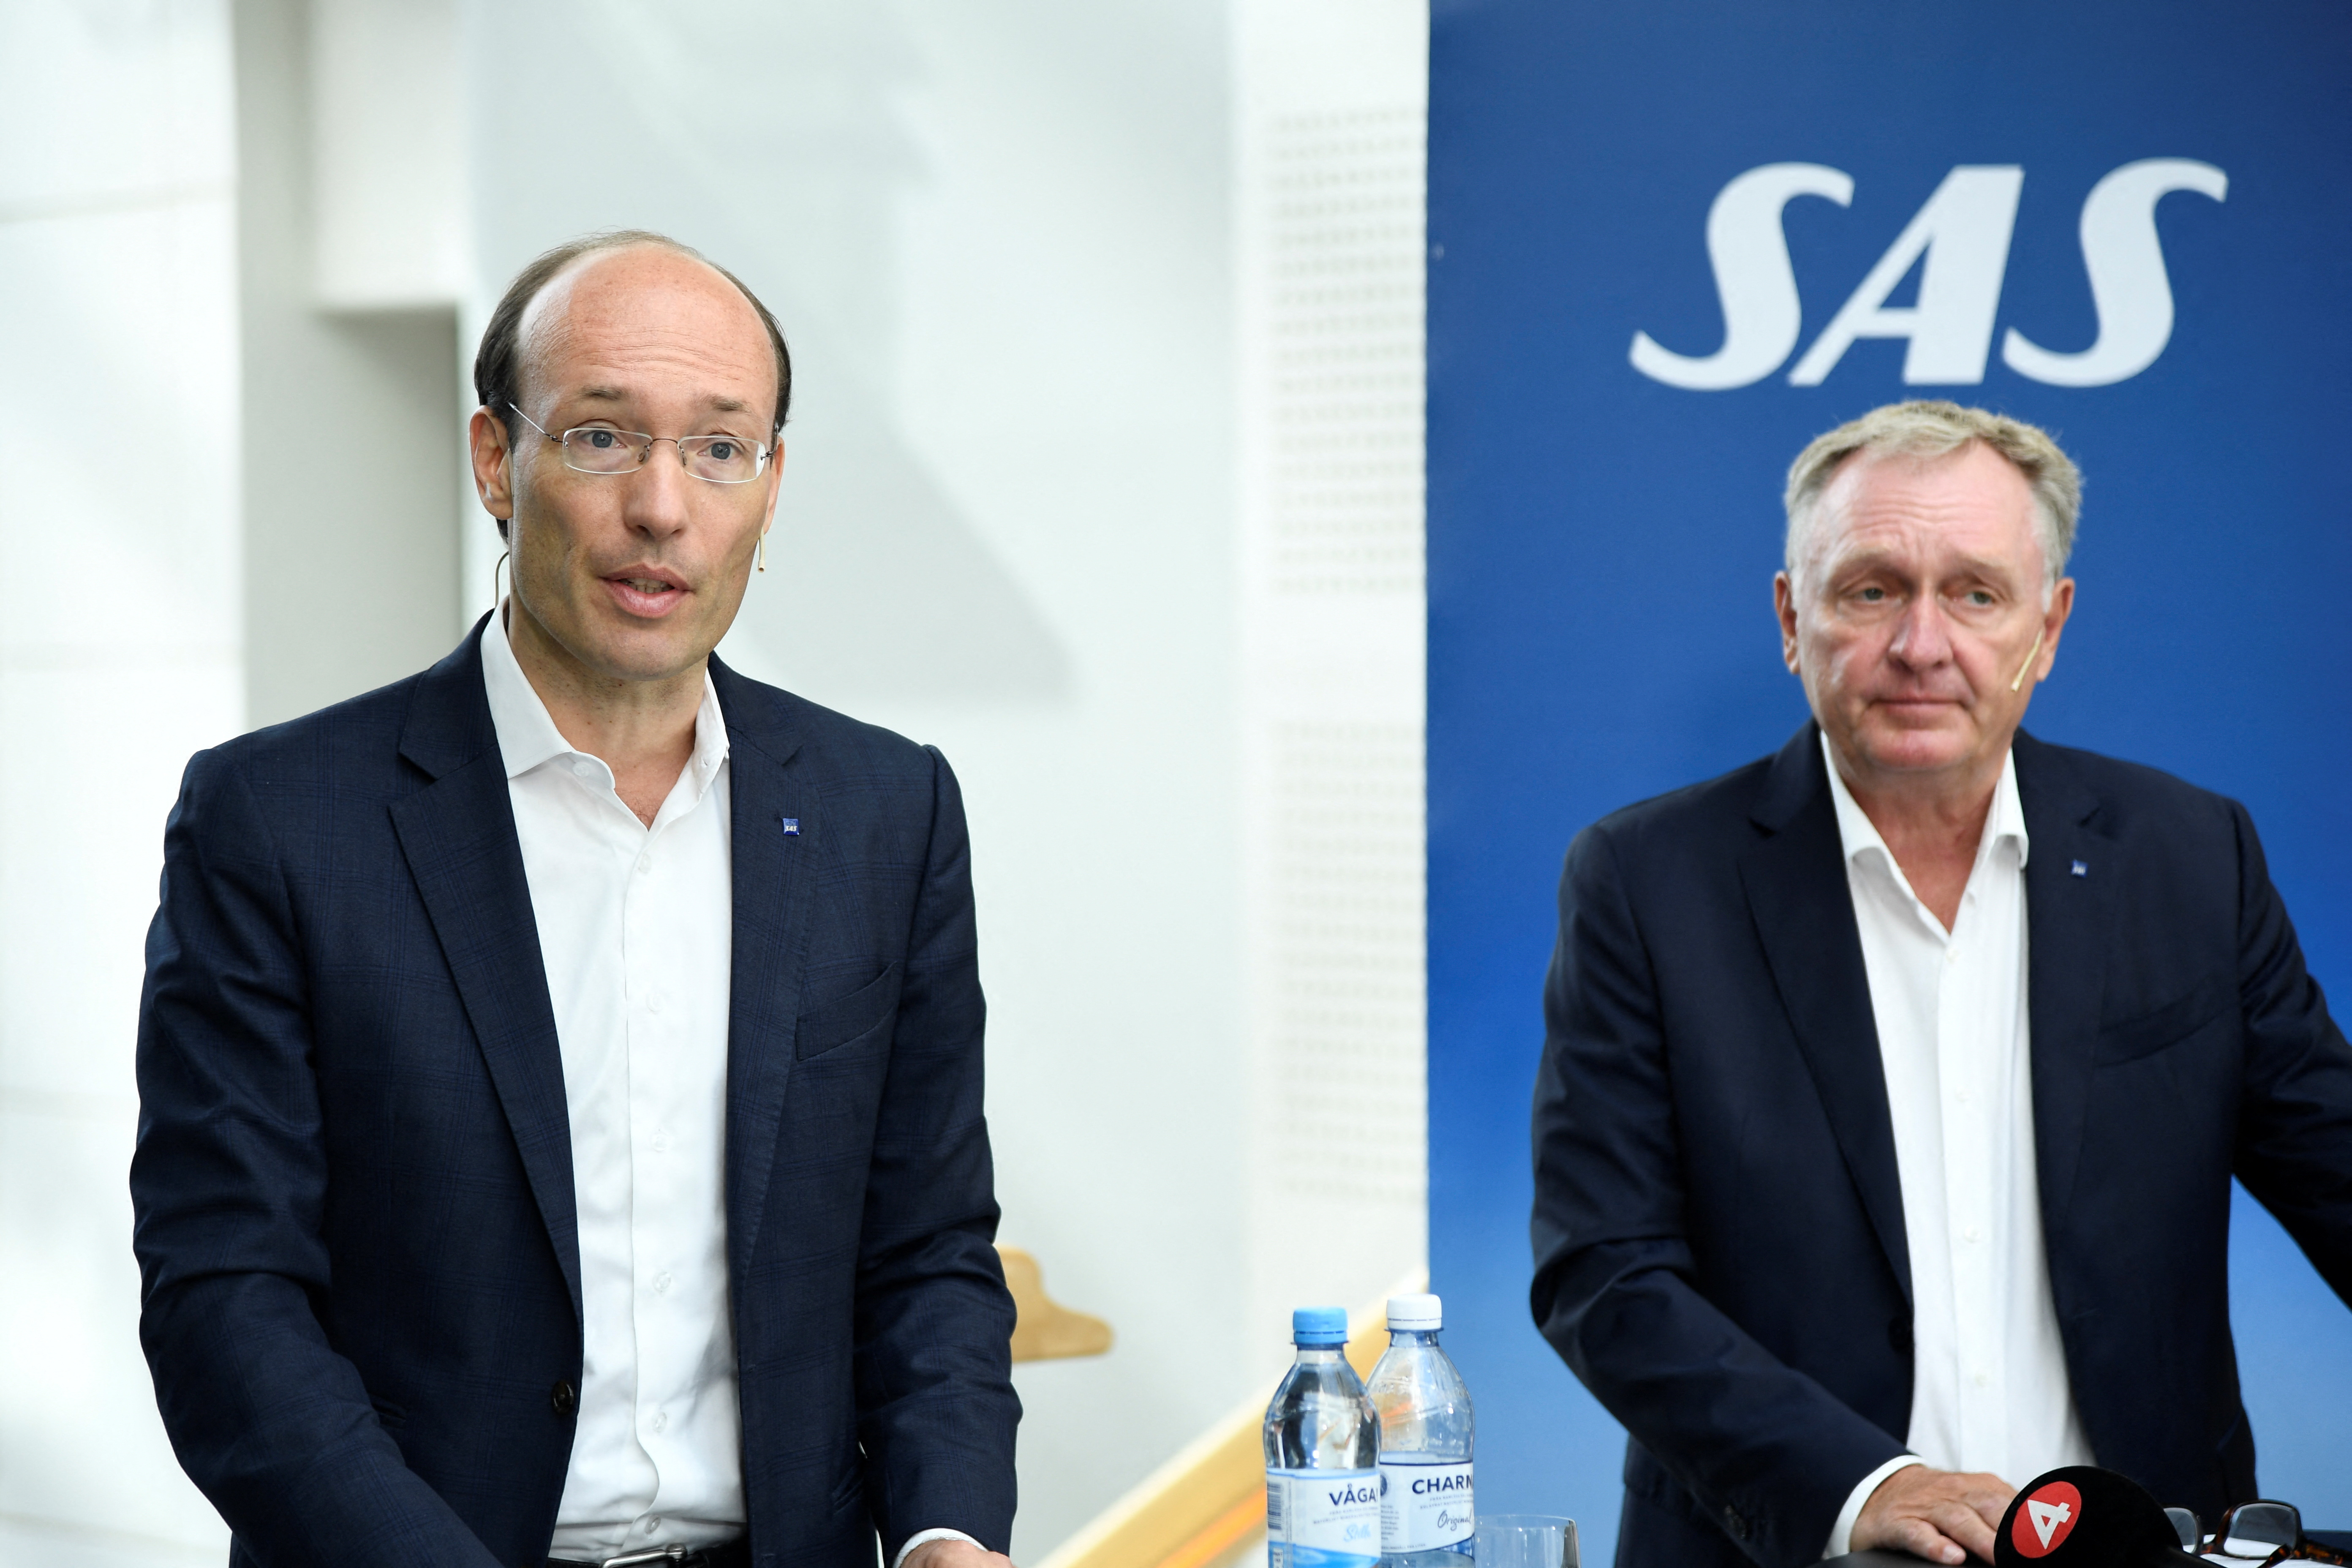 News conference of SAS chairmen in Stockholm